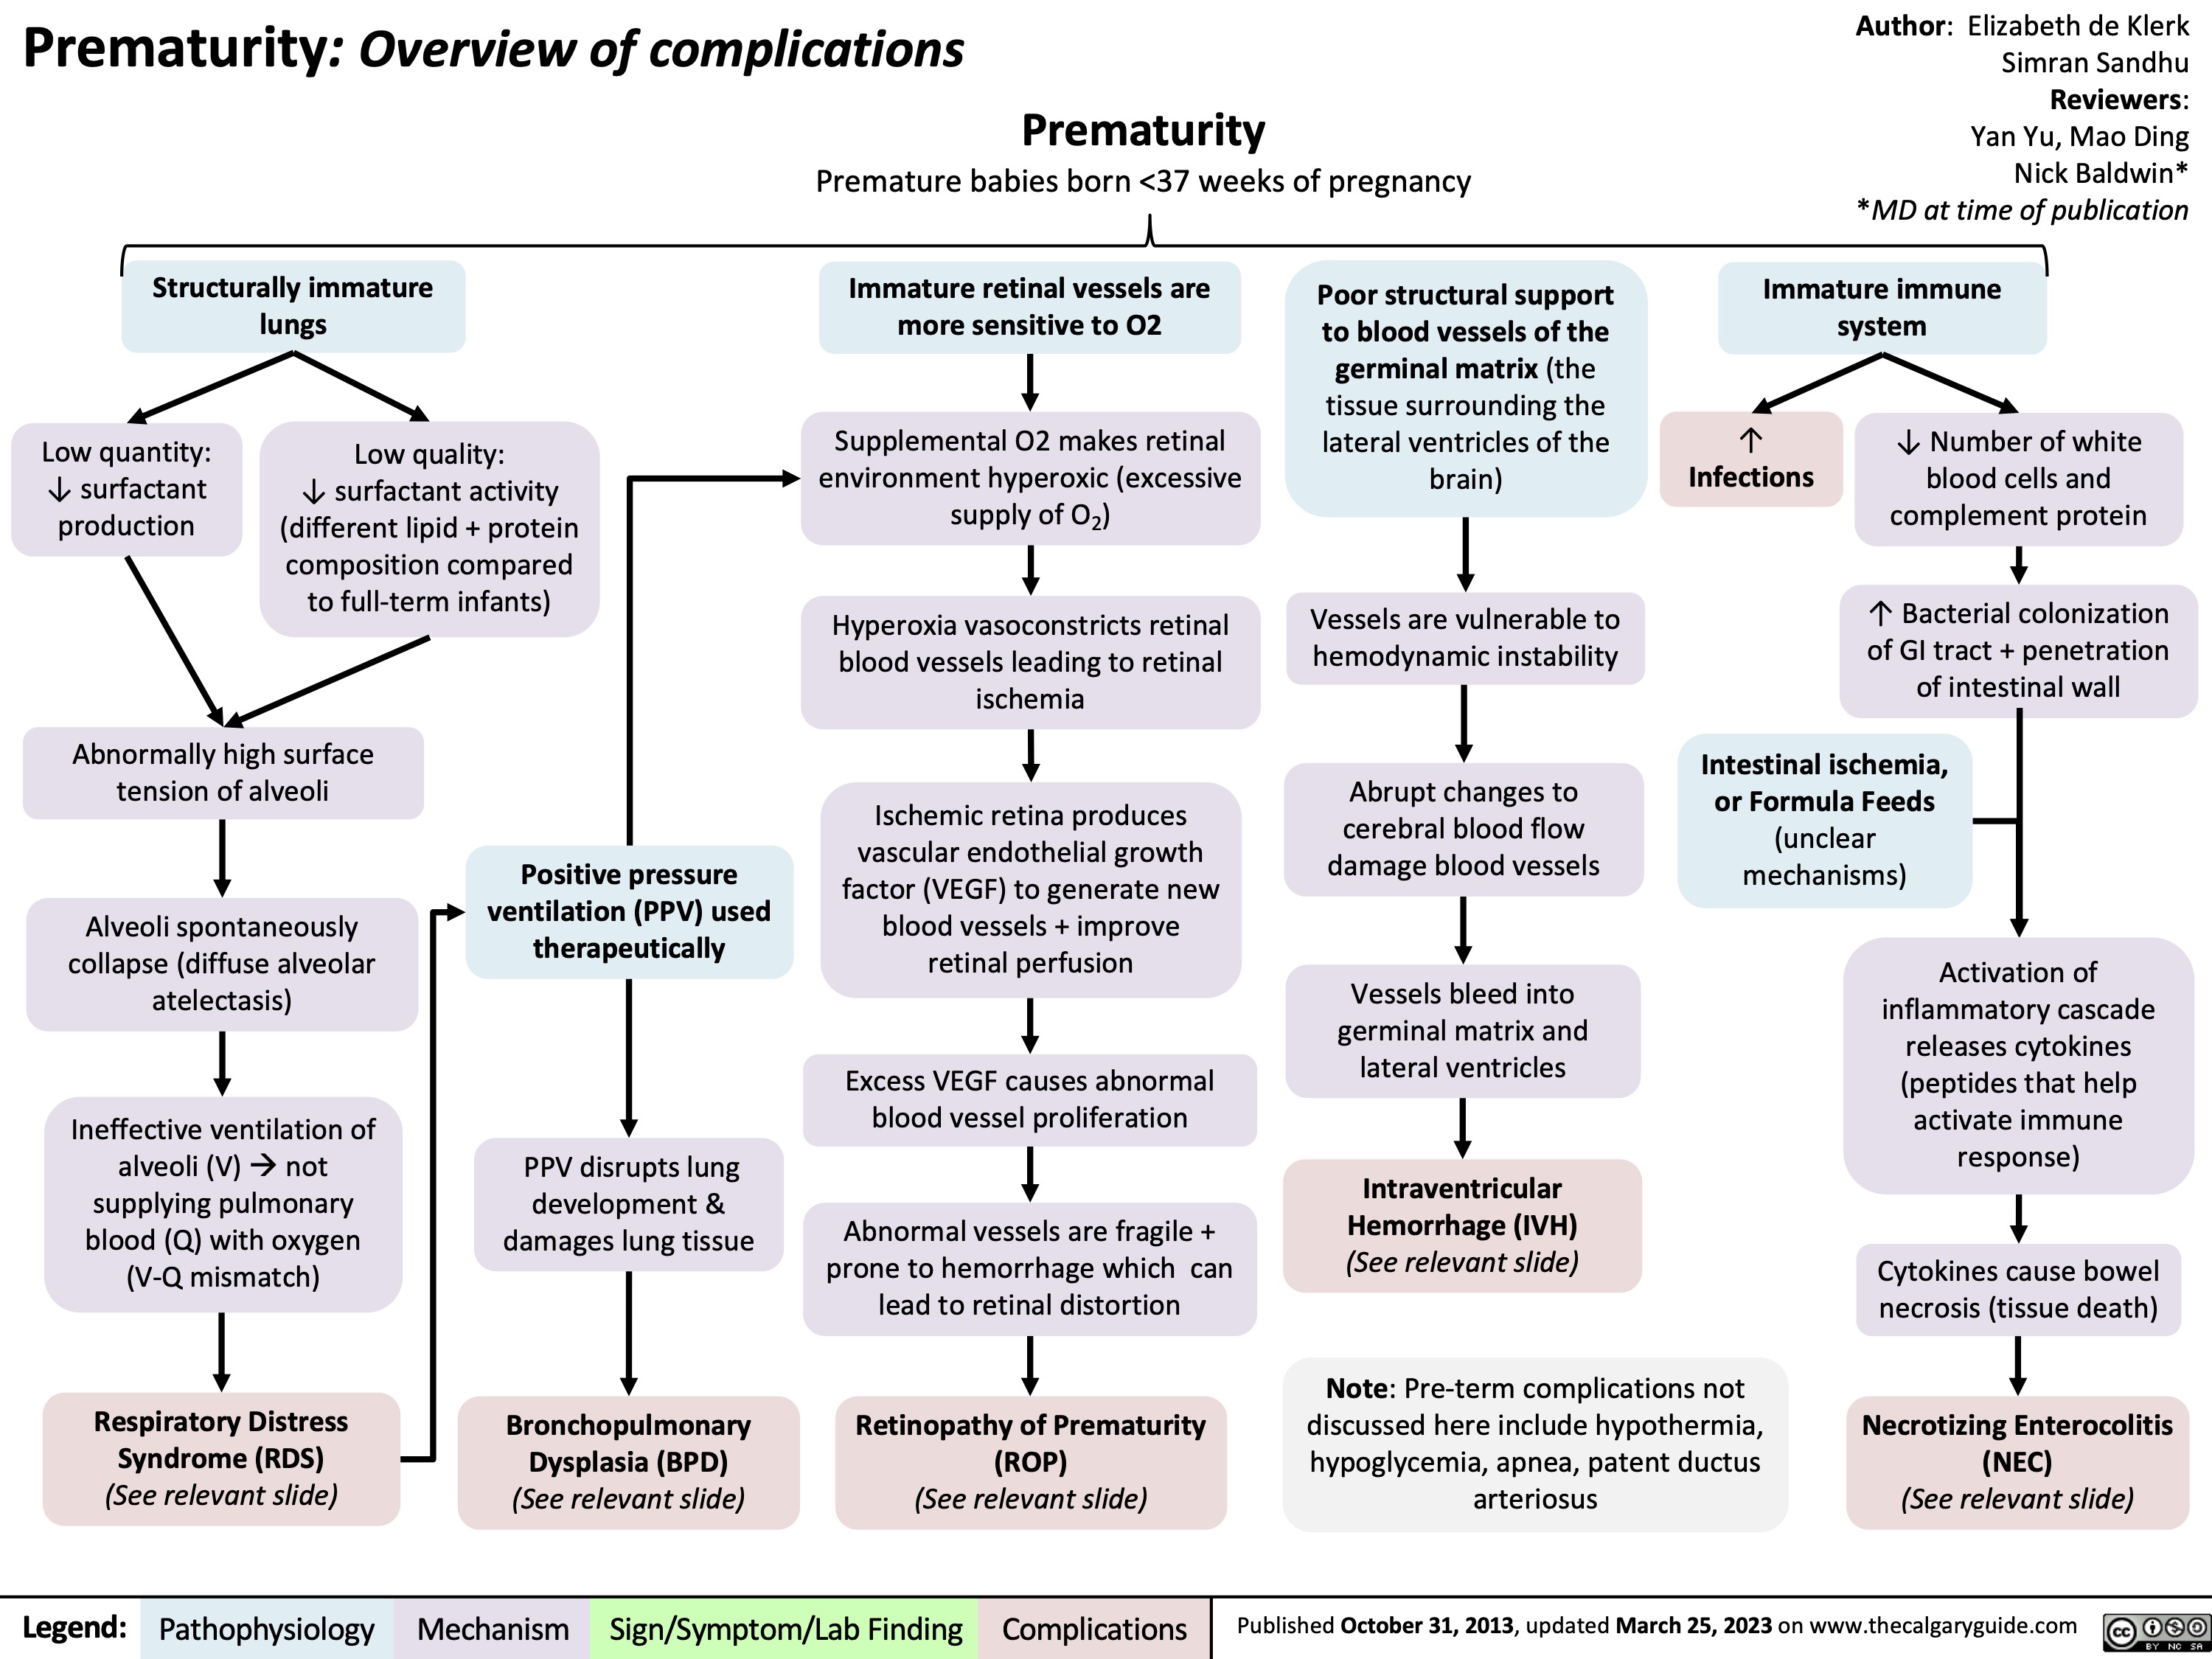 Prematurity: Overview of complications
Premature babies born <37 weeks of pregnancy
Author: Elizabeth de Klerk Simran Sandhu Reviewers: Yan Yu, Mao Ding Nick Baldwin* *MD at time of publication
Immature immune system
Prematurity
     Structurally immature lungs
Immature retinal vessels are more sensitive to O2
Supplemental O2 makes retinal environment hyperoxic (excessive supply of O2)
Hyperoxia vasoconstricts retinal blood vessels leading to retinal ischemia
Ischemic retina produces vascular endothelial growth factor (VEGF) to generate new blood vessels + improve retinal perfusion
Excess VEGF causes abnormal blood vessel proliferation
Abnormal vessels are fragile + prone to hemorrhage which can lead to retinal distortion
Retinopathy of Prematurity (ROP)
(See relevant slide)
Poor structural support to blood vessels of the germinal matrix (the tissue surrounding the lateral ventricles of the brain)
Vessels are vulnerable to hemodynamic instability
Abrupt changes to cerebral blood flow damage blood vessels
Vessels bleed into germinal matrix and lateral ventricles
Intraventricular Hemorrhage (IVH) (See relevant slide)
Note: Pre-term complications not discussed here include hypothermia, hypoglycemia, apnea, patent ductus arteriosus
         Low quantity: ↓ surfactant production
Low quality:
↓ surfactant activity (different lipid + protein composition compared to full-term infants)
↑
Infections
↓ Number of white blood cells and complement protein
↑ Bacterial colonization of GI tract + penetration of intestinal wall
         Abnormally high surface tension of alveoli
Alveoli spontaneously collapse (diffuse alveolar atelectasis)
Ineffective ventilation of alveoli (V)ànot supplying pulmonary blood (Q) with oxygen (V-Q mismatch)
Respiratory Distress Syndrome (RDS) (See relevant slide)
Positive pressure ventilation (PPV) used therapeutically
PPV disrupts lung development & damages lung tissue
Bronchopulmonary Dysplasia (BPD) (See relevant slide)
Intestinal ischemia, or Formula Feeds (unclear mechanisms)
       Activation of inflammatory cascade releases cytokines (peptides that help activate immune response)
Cytokines cause bowel necrosis (tissue death)
Necrotizing Enterocolitis (NEC)
(See relevant slide)
               Legend:
 Pathophysiology
 Mechanism
Sign/Symptom/Lab Finding
 Complications
Published October 31, 2013, updated March 25, 2023 on www.thecalgaryguide.com
   